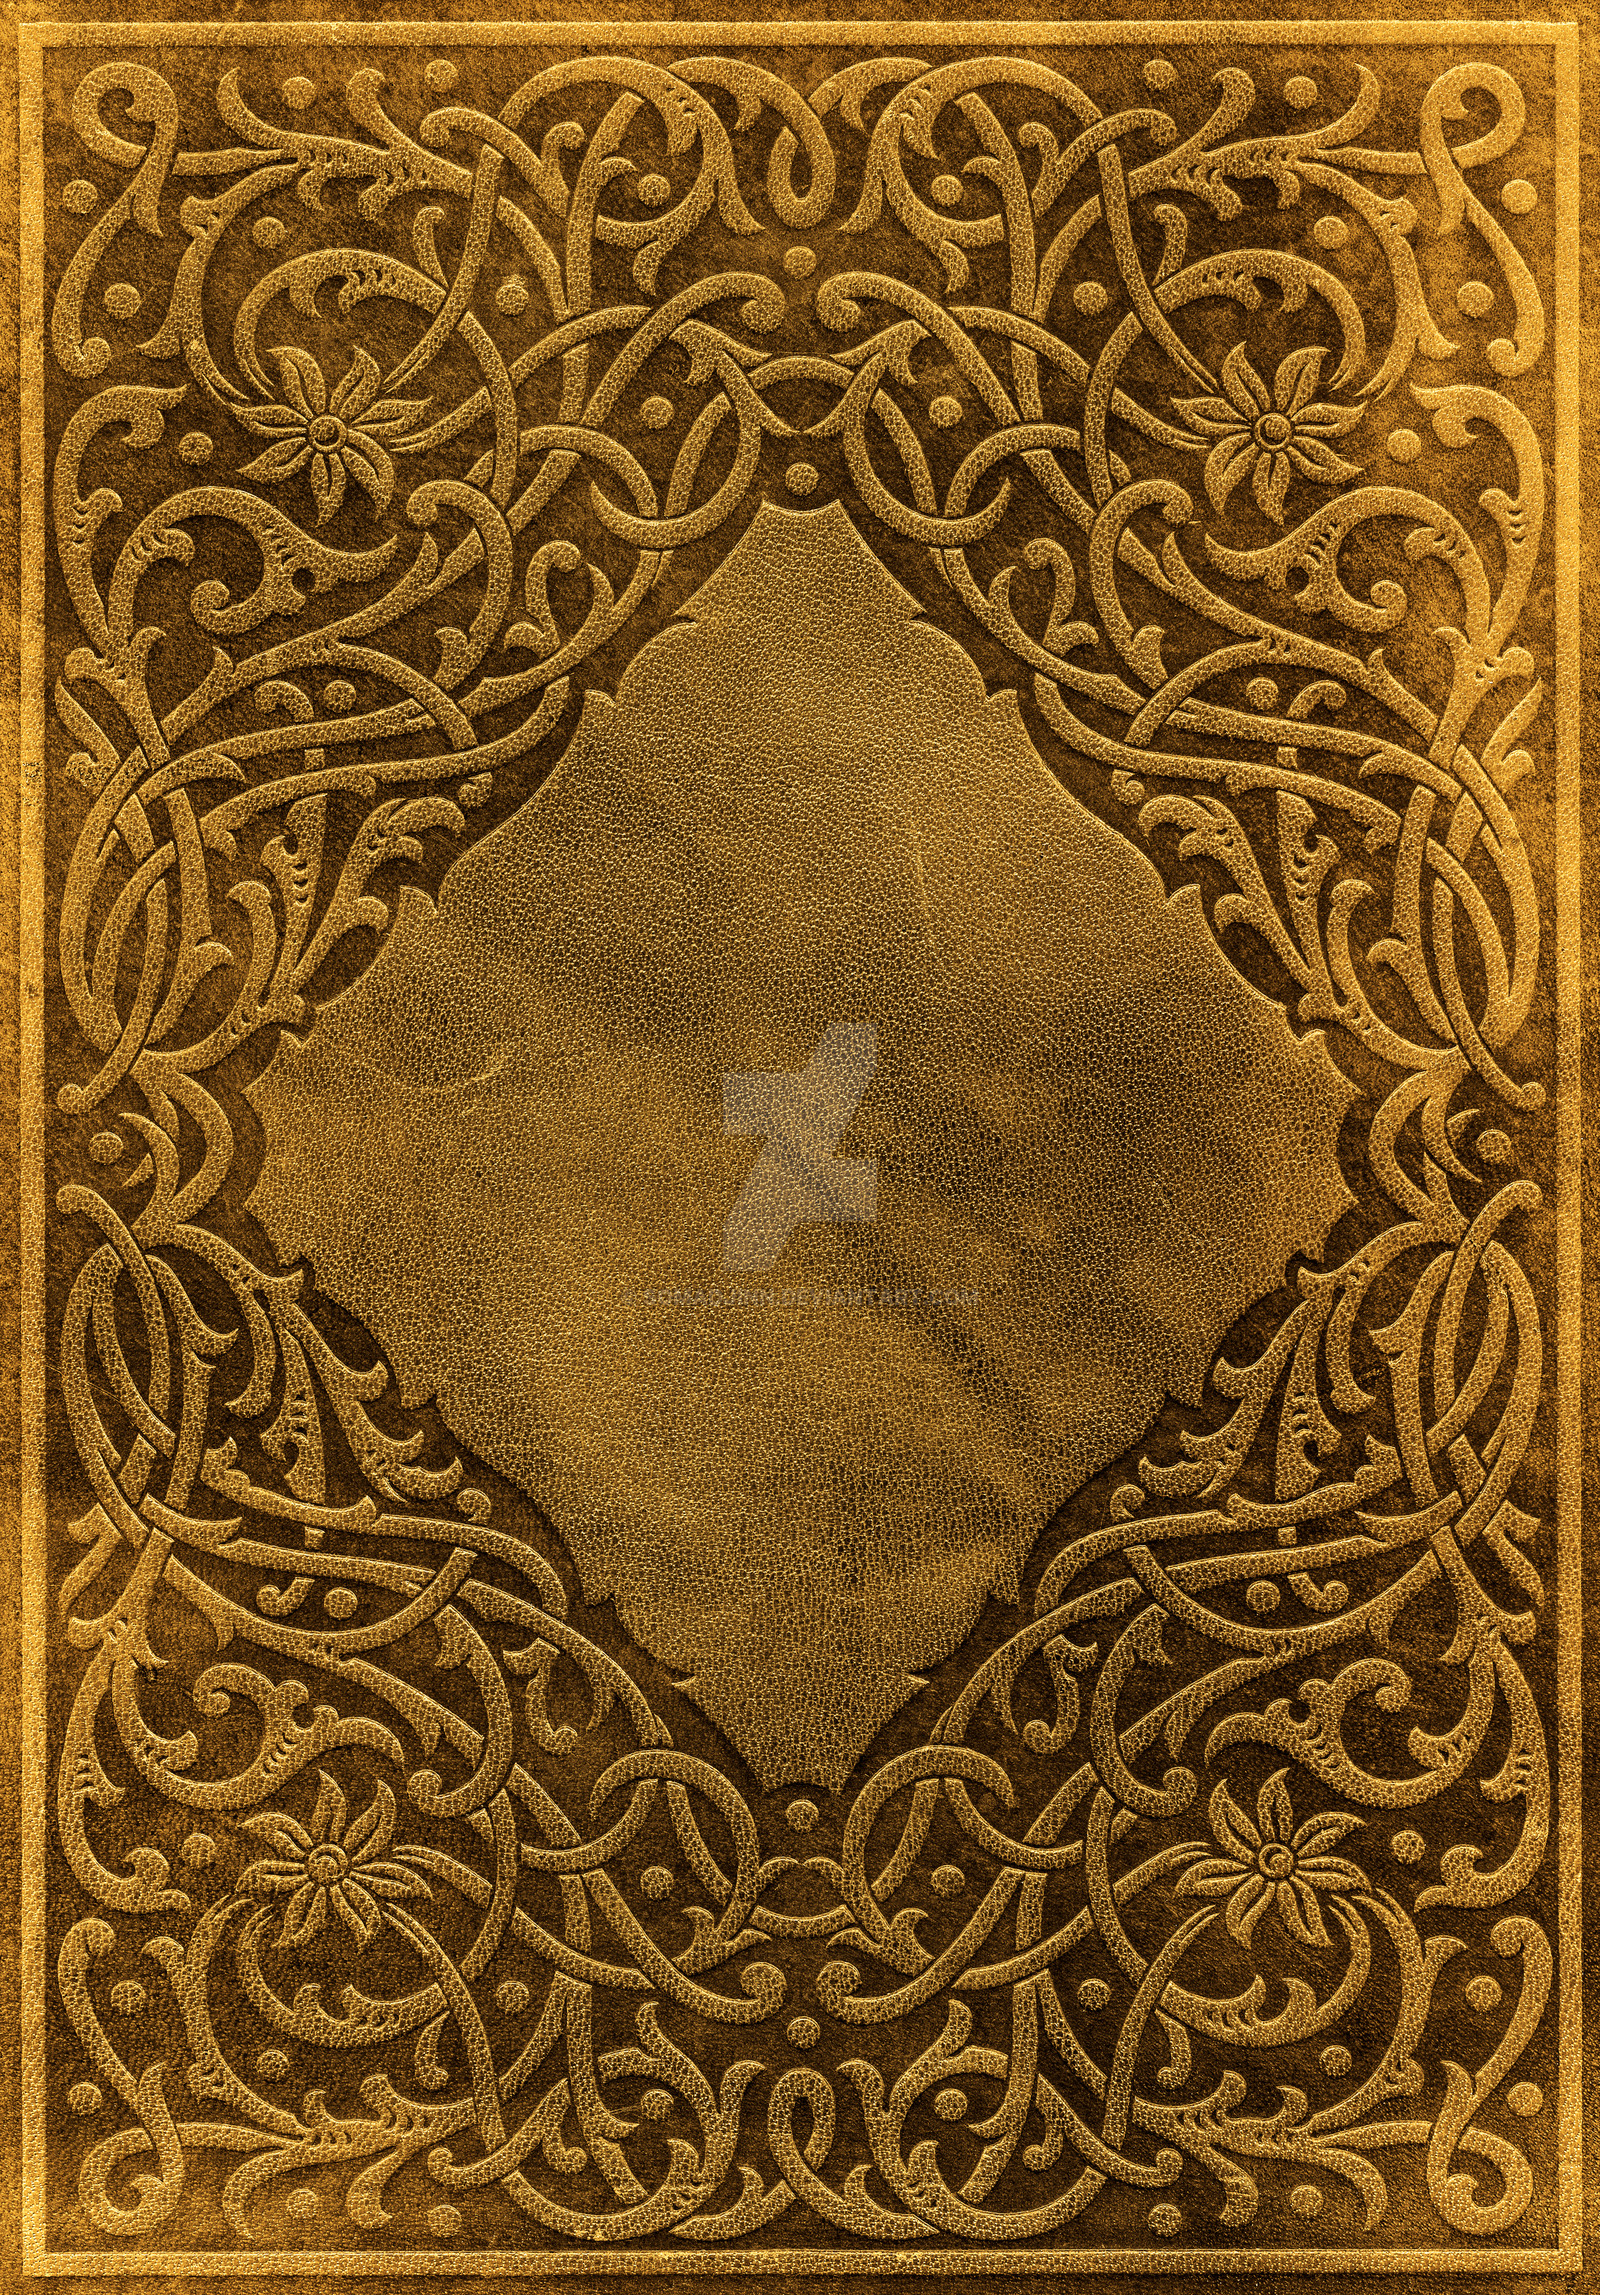 Gold Vintage Book Cover Exclusive Stock by somadjinn on DeviantArt